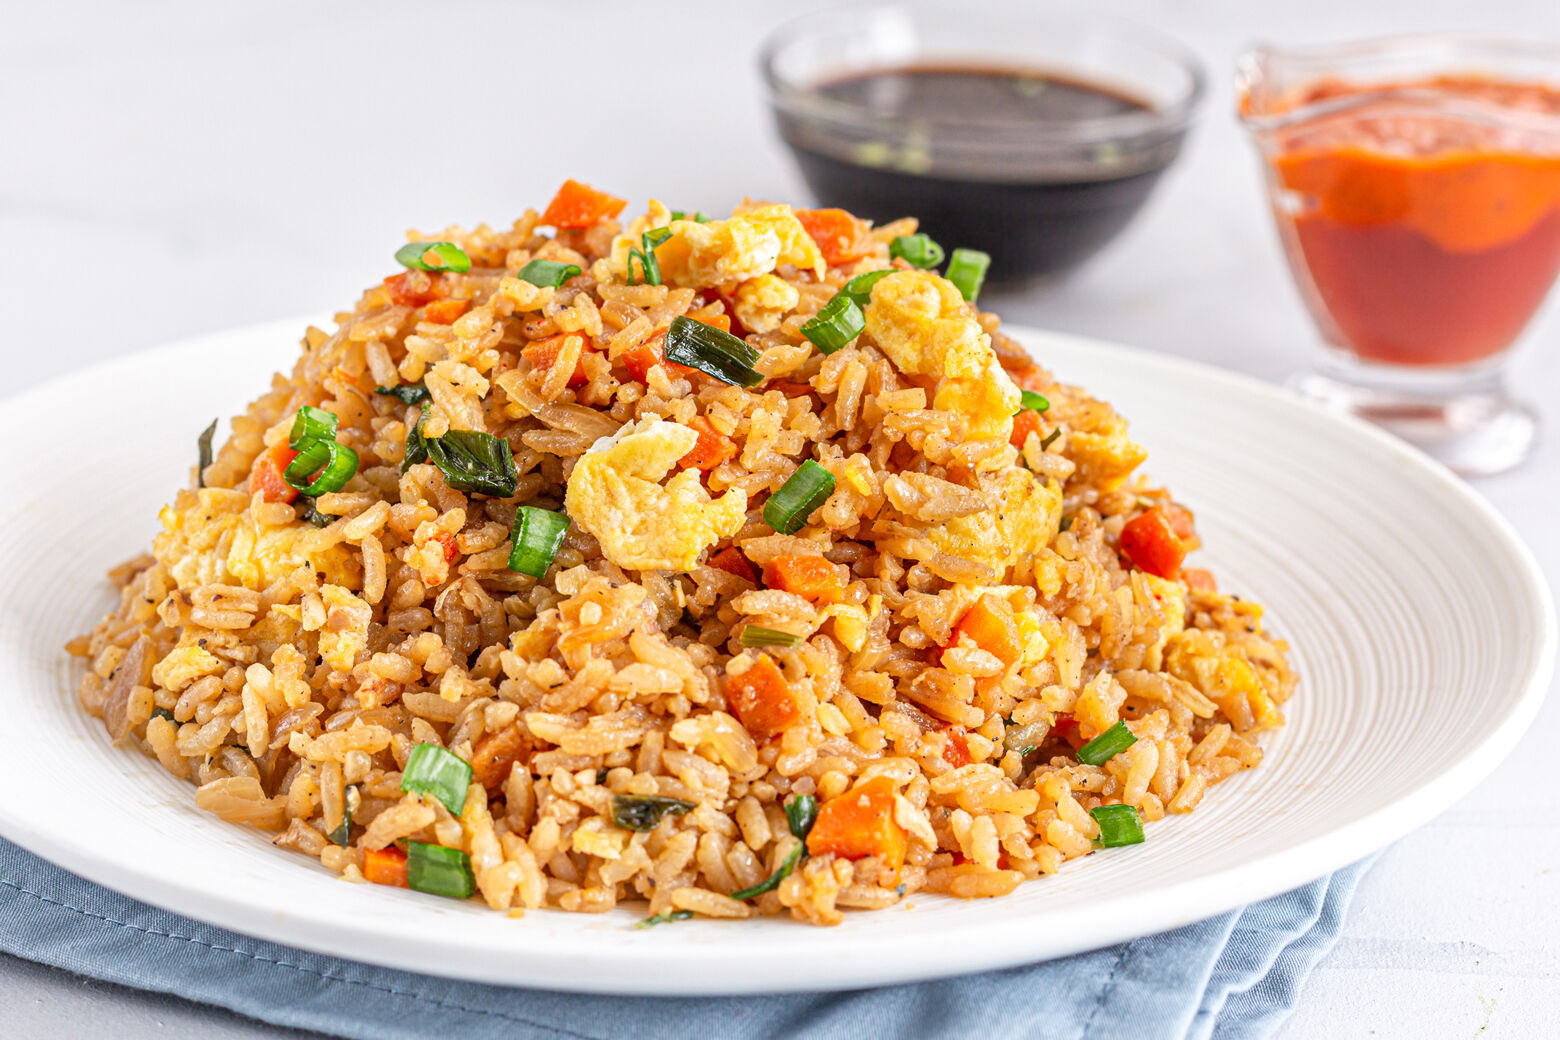 <h2>Turkey fried rice</h2>
<p>Leftover turkey can be given new life in fried rice.</p>
<p>Use cold rice and a large wok or deep pan to make <a href="https://www.alicaspepperpot.com/leftover-turkey-fried-rice/">this recipe.</a></p>
<p>&nbsp;</p>
